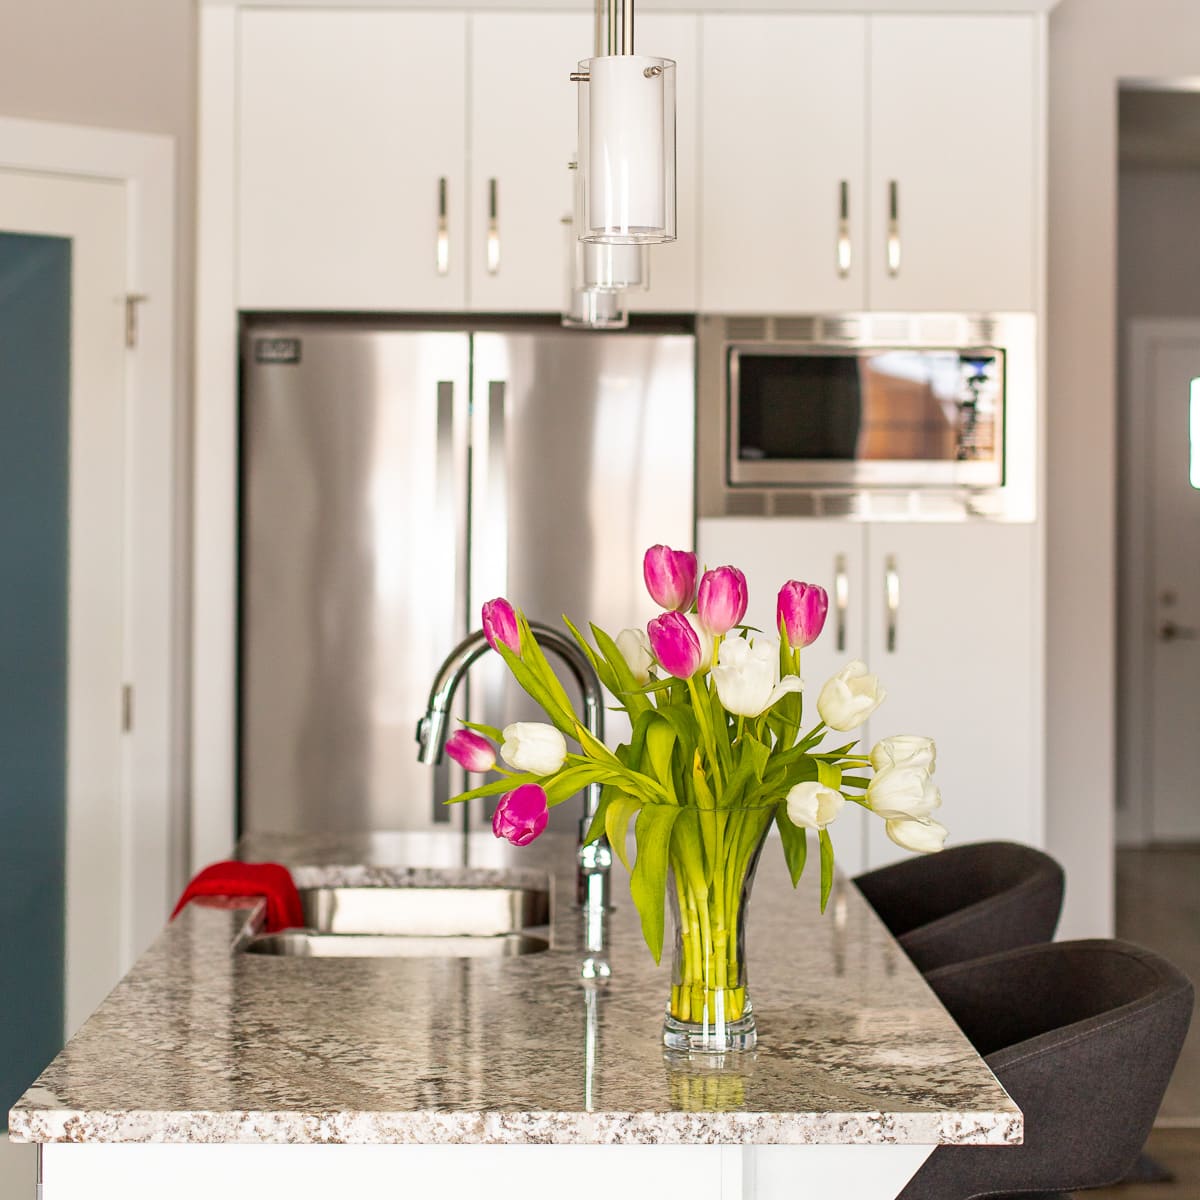 a kitchen with tulips in a vase